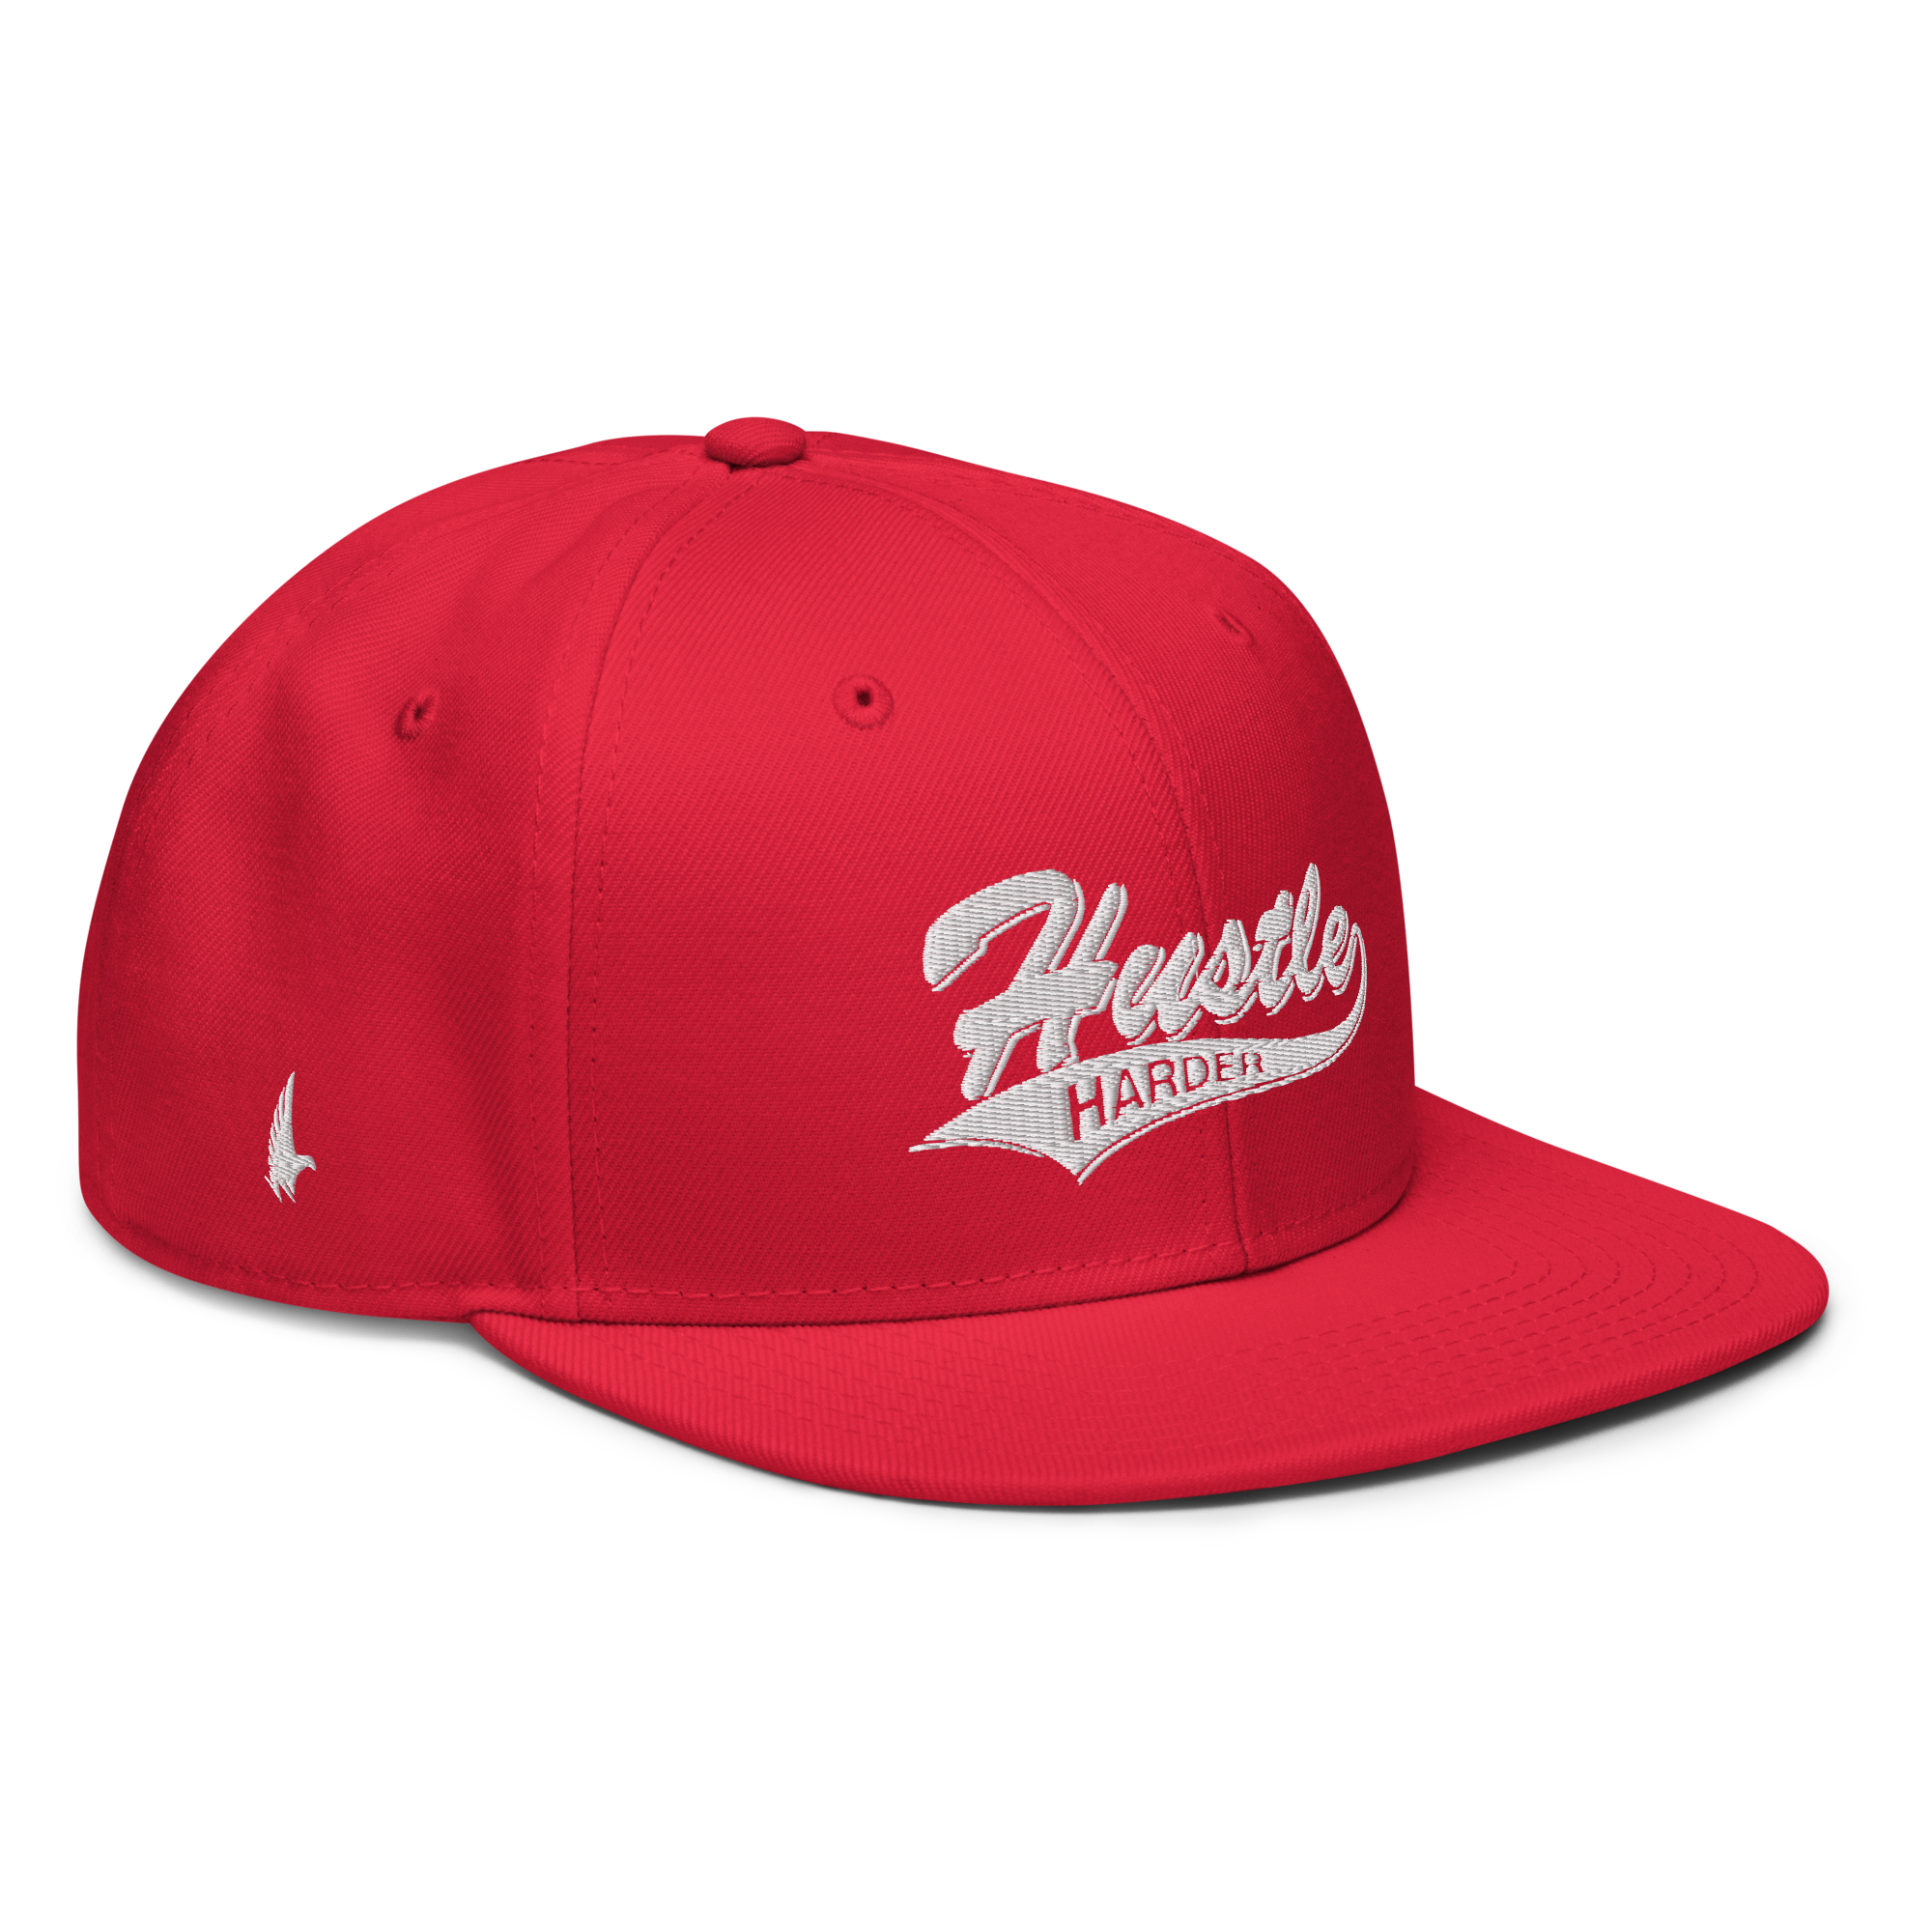 Hustle Harder Snapback Hat - Red / White OS - Loyalty Vibes